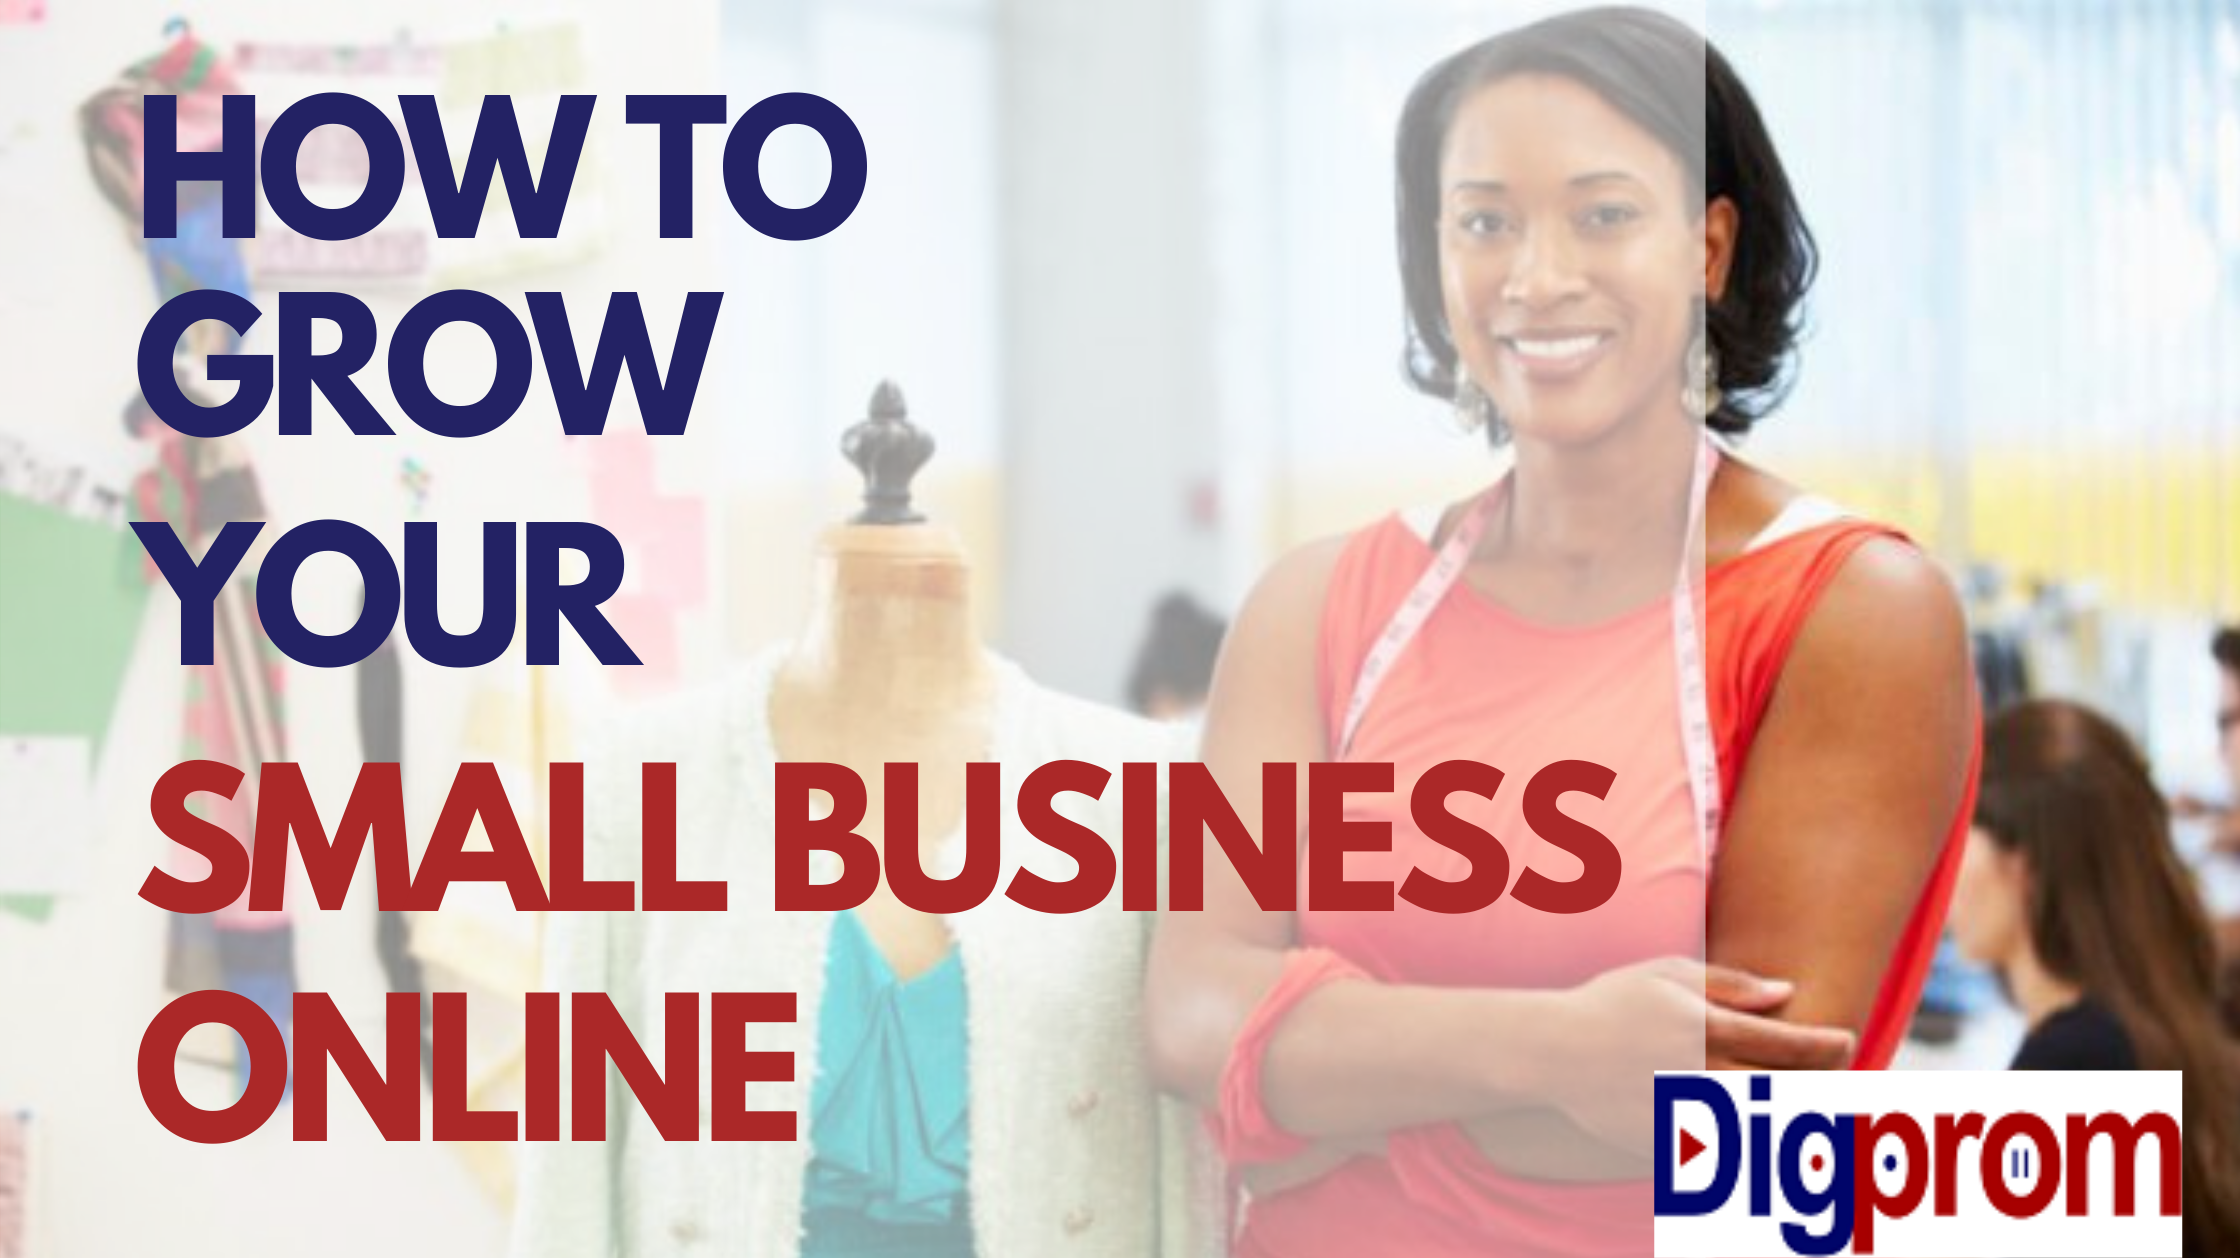 How to grow small business online – 8 proven ways